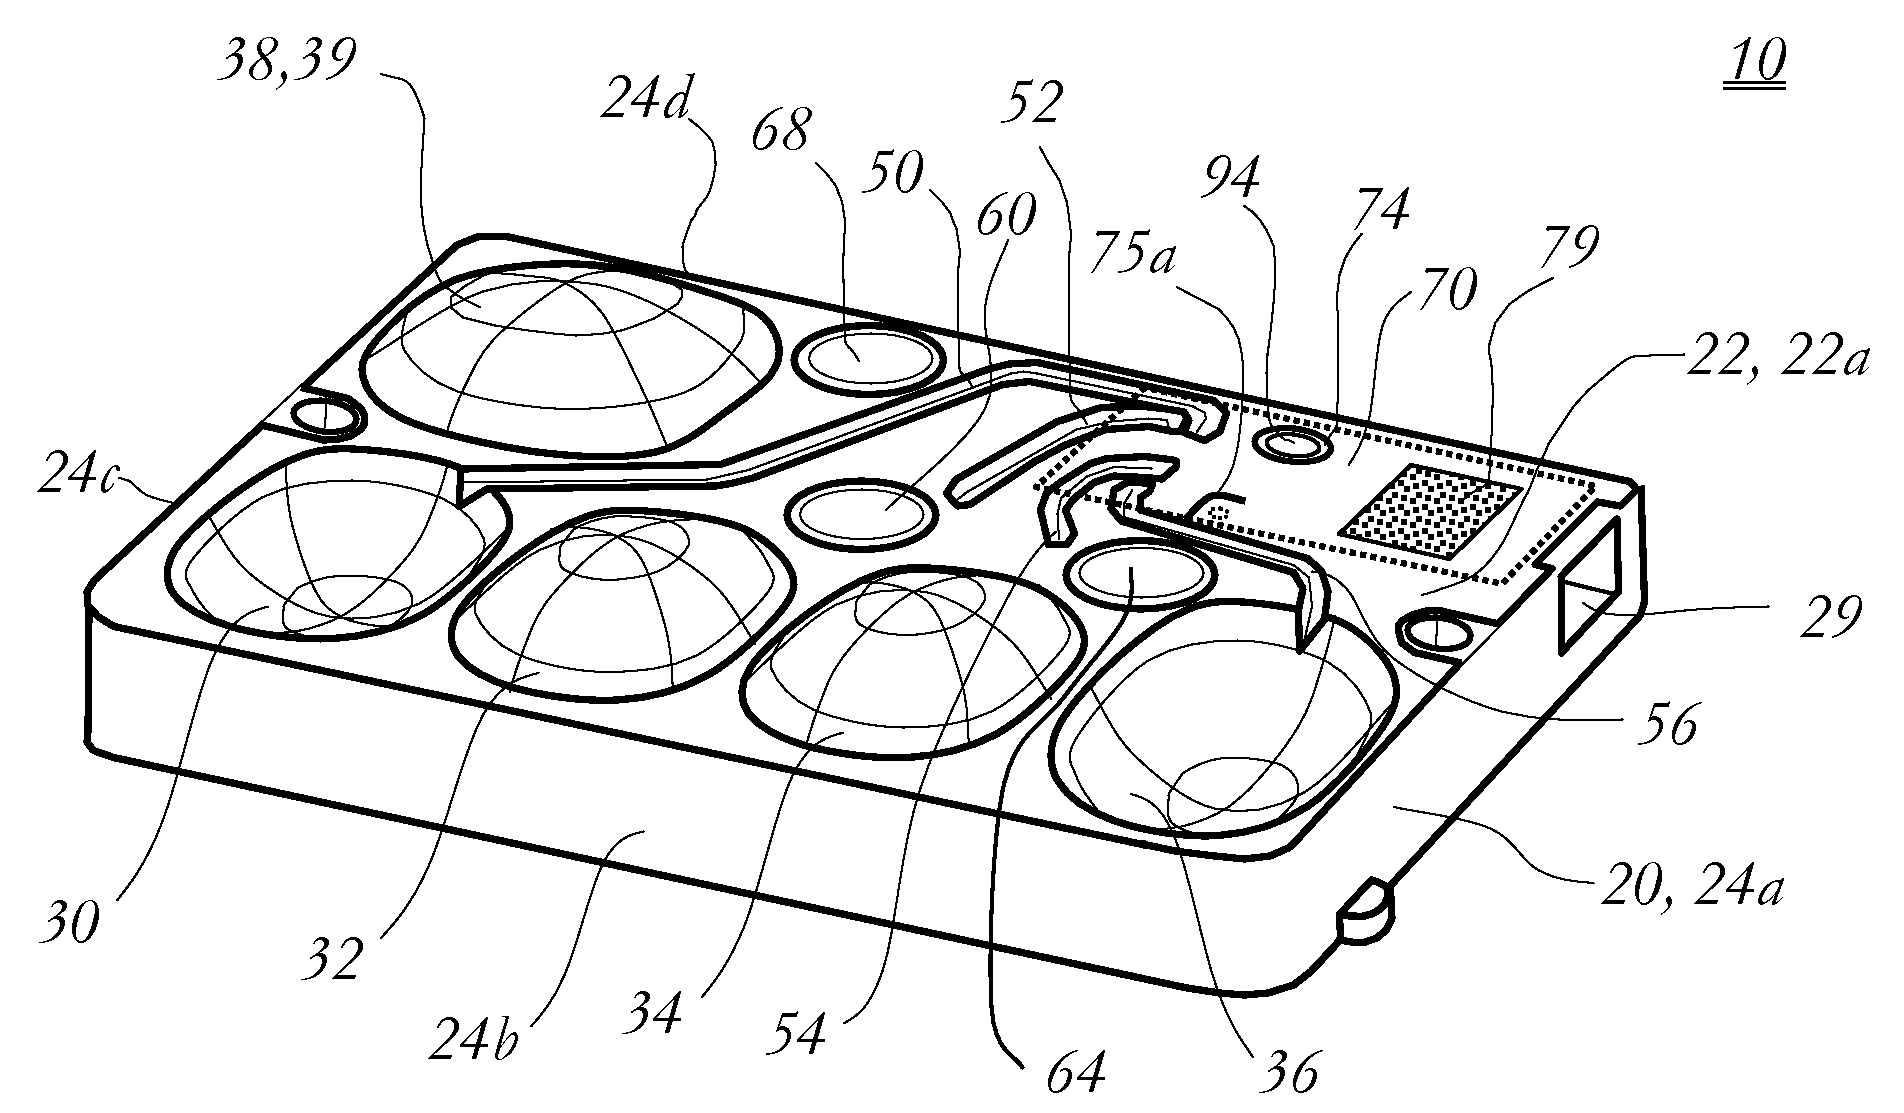 Disposable cassette and method of use for blood analysis on blood analyzer